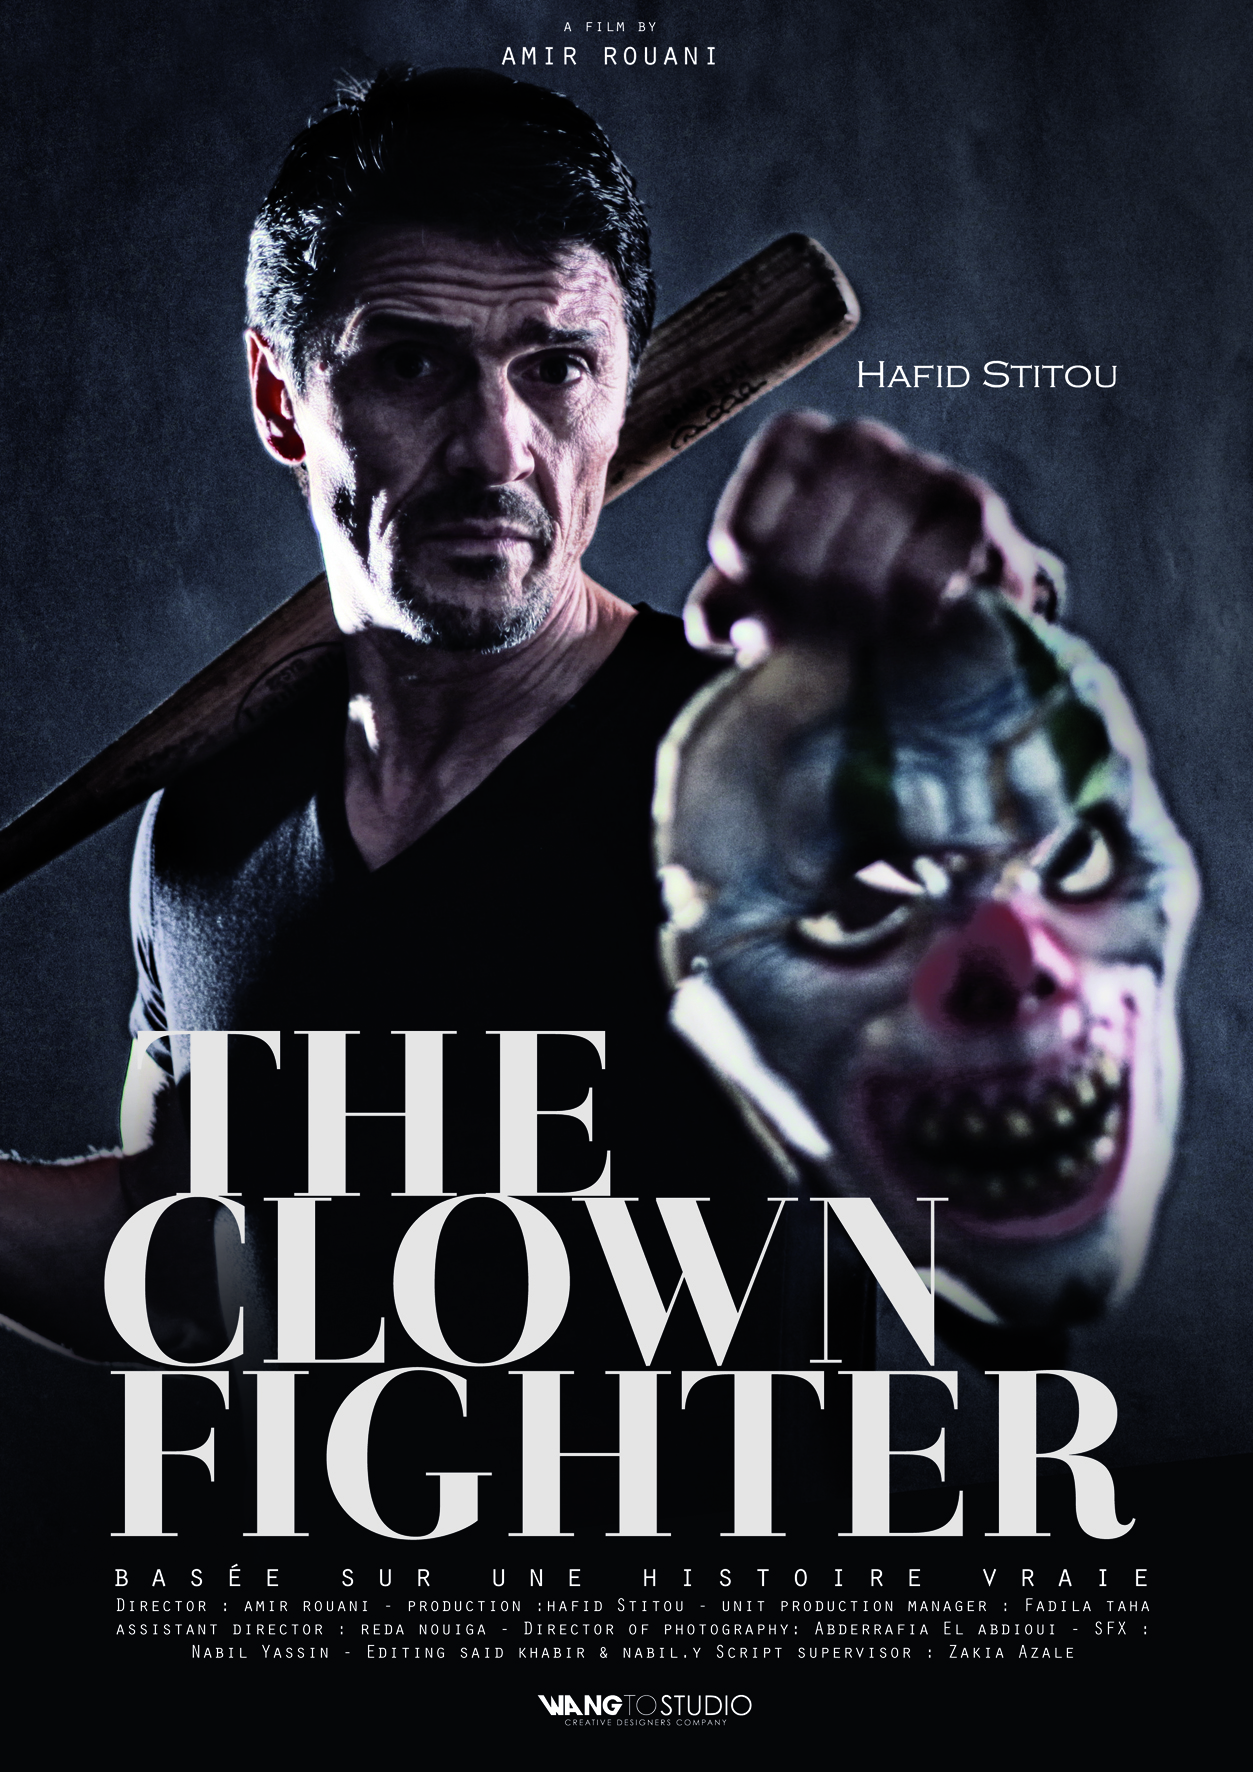 The clown fighter